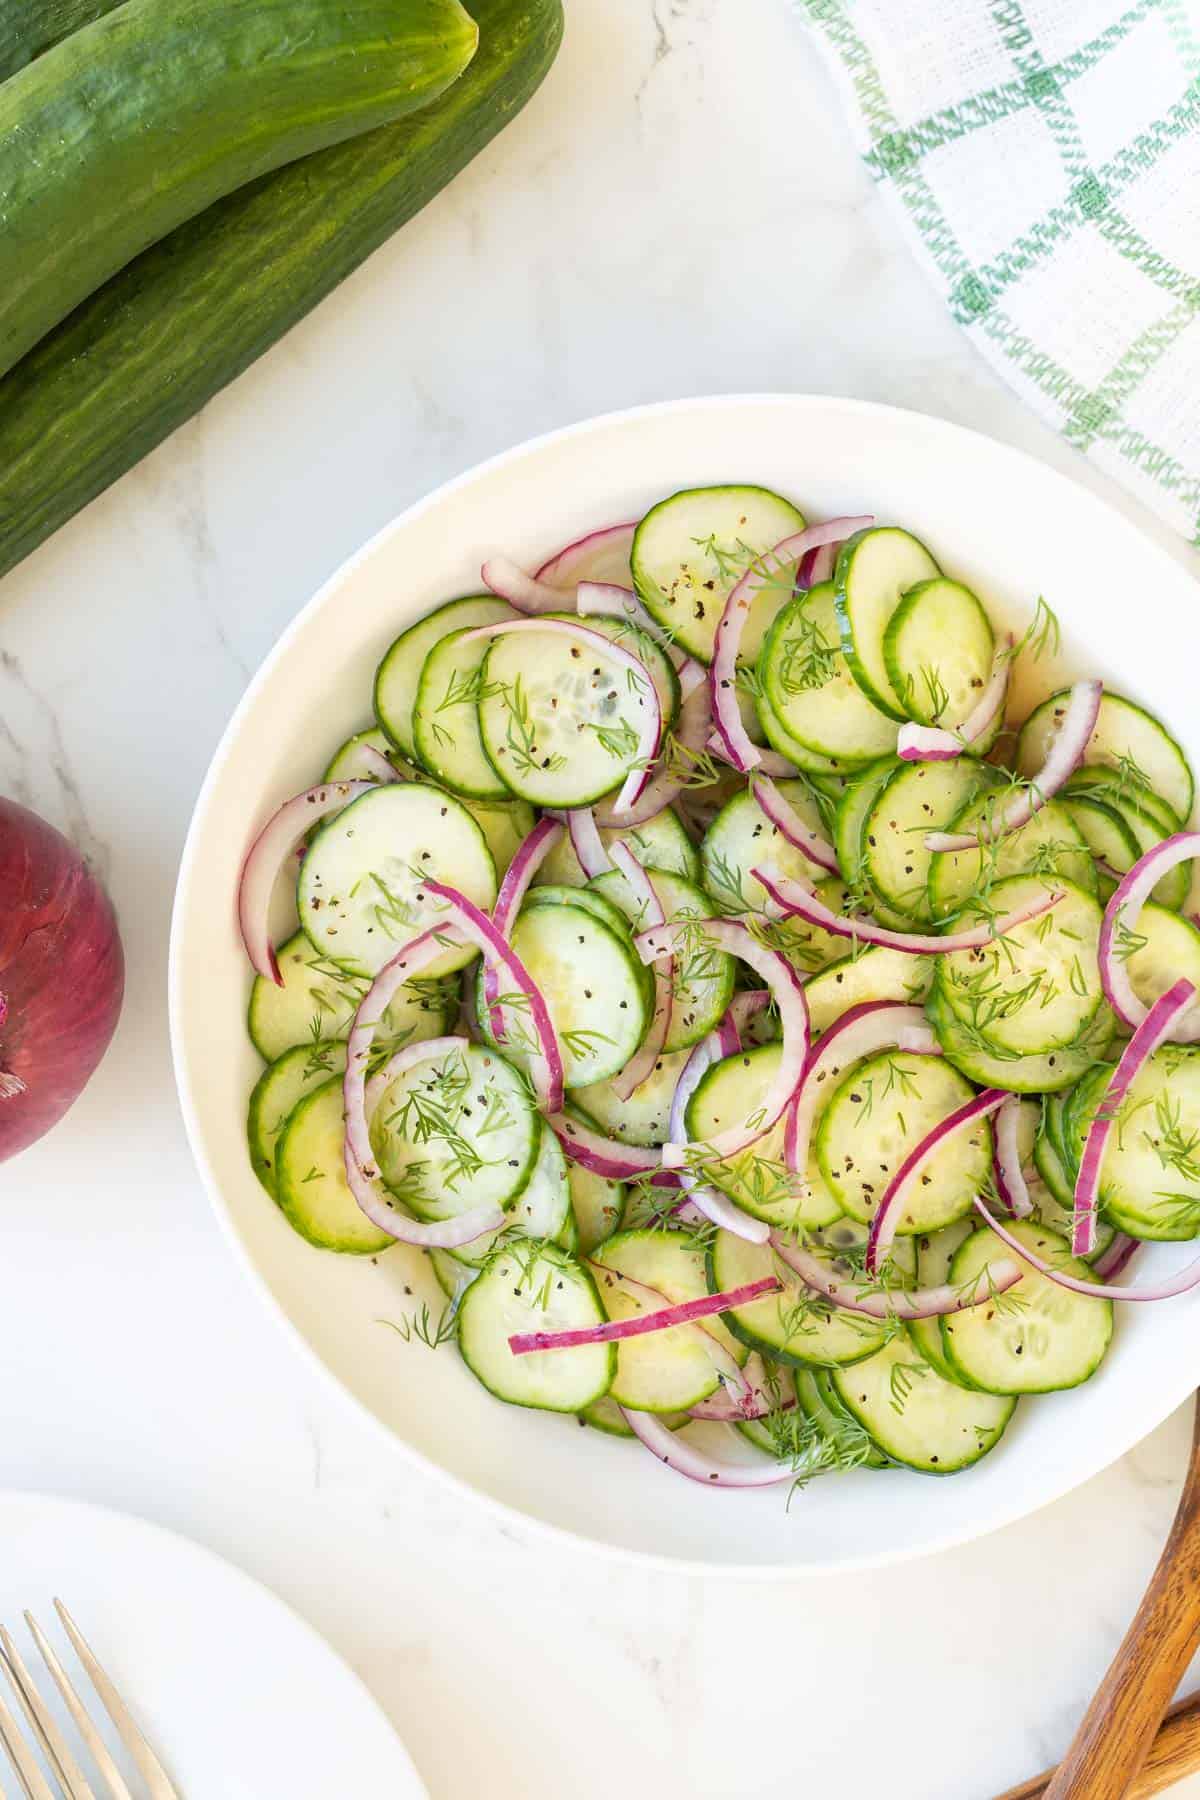 Cucumber onion salad in a white bowl beside a green and white dish towel.